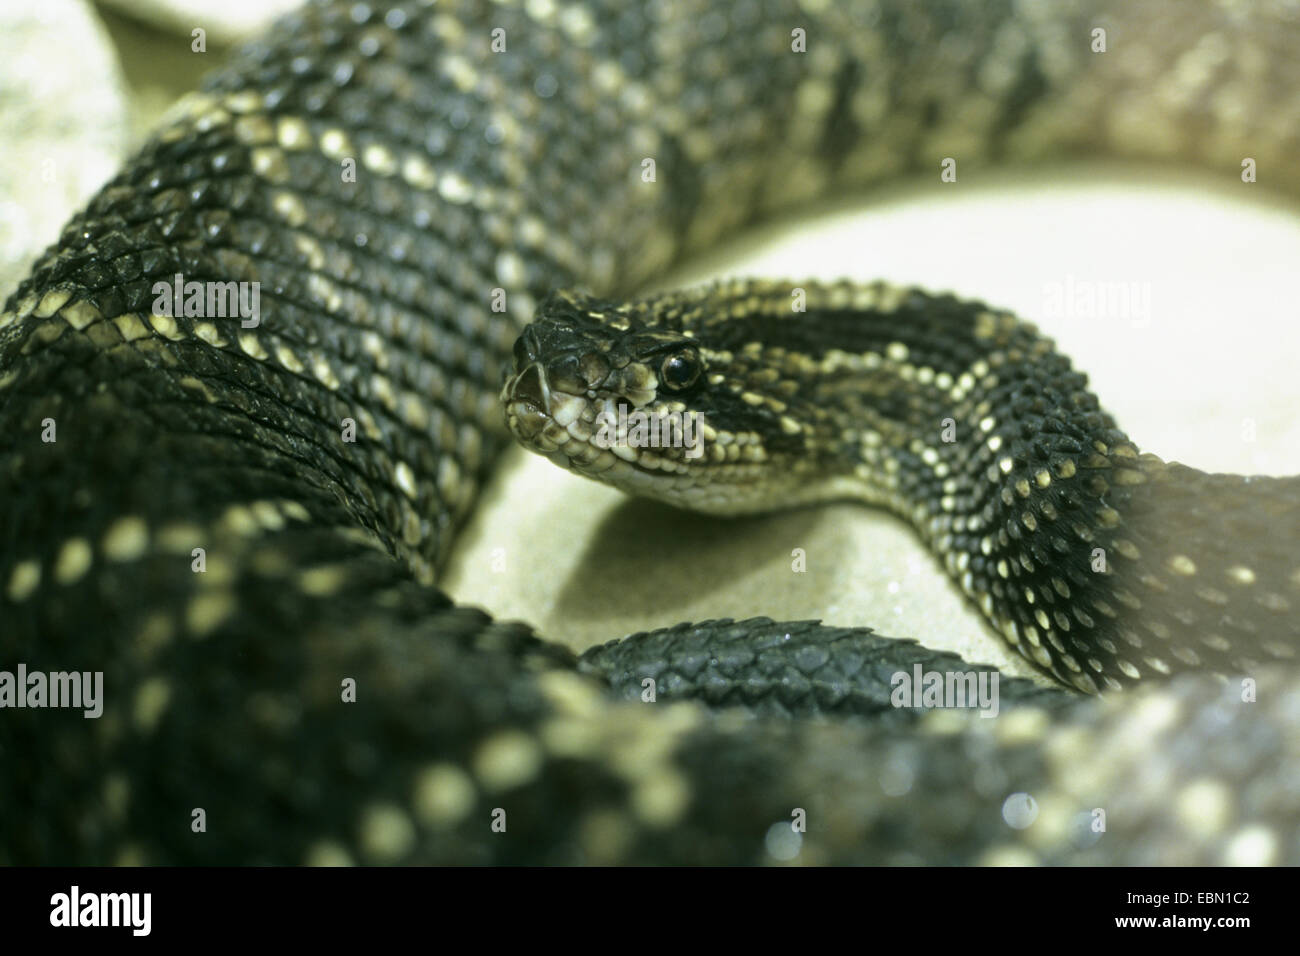 neotropical rattlesnake, cascabel (Crotalus durissus, Crotalus terrificus), portrait , rolled-up Stock Photo